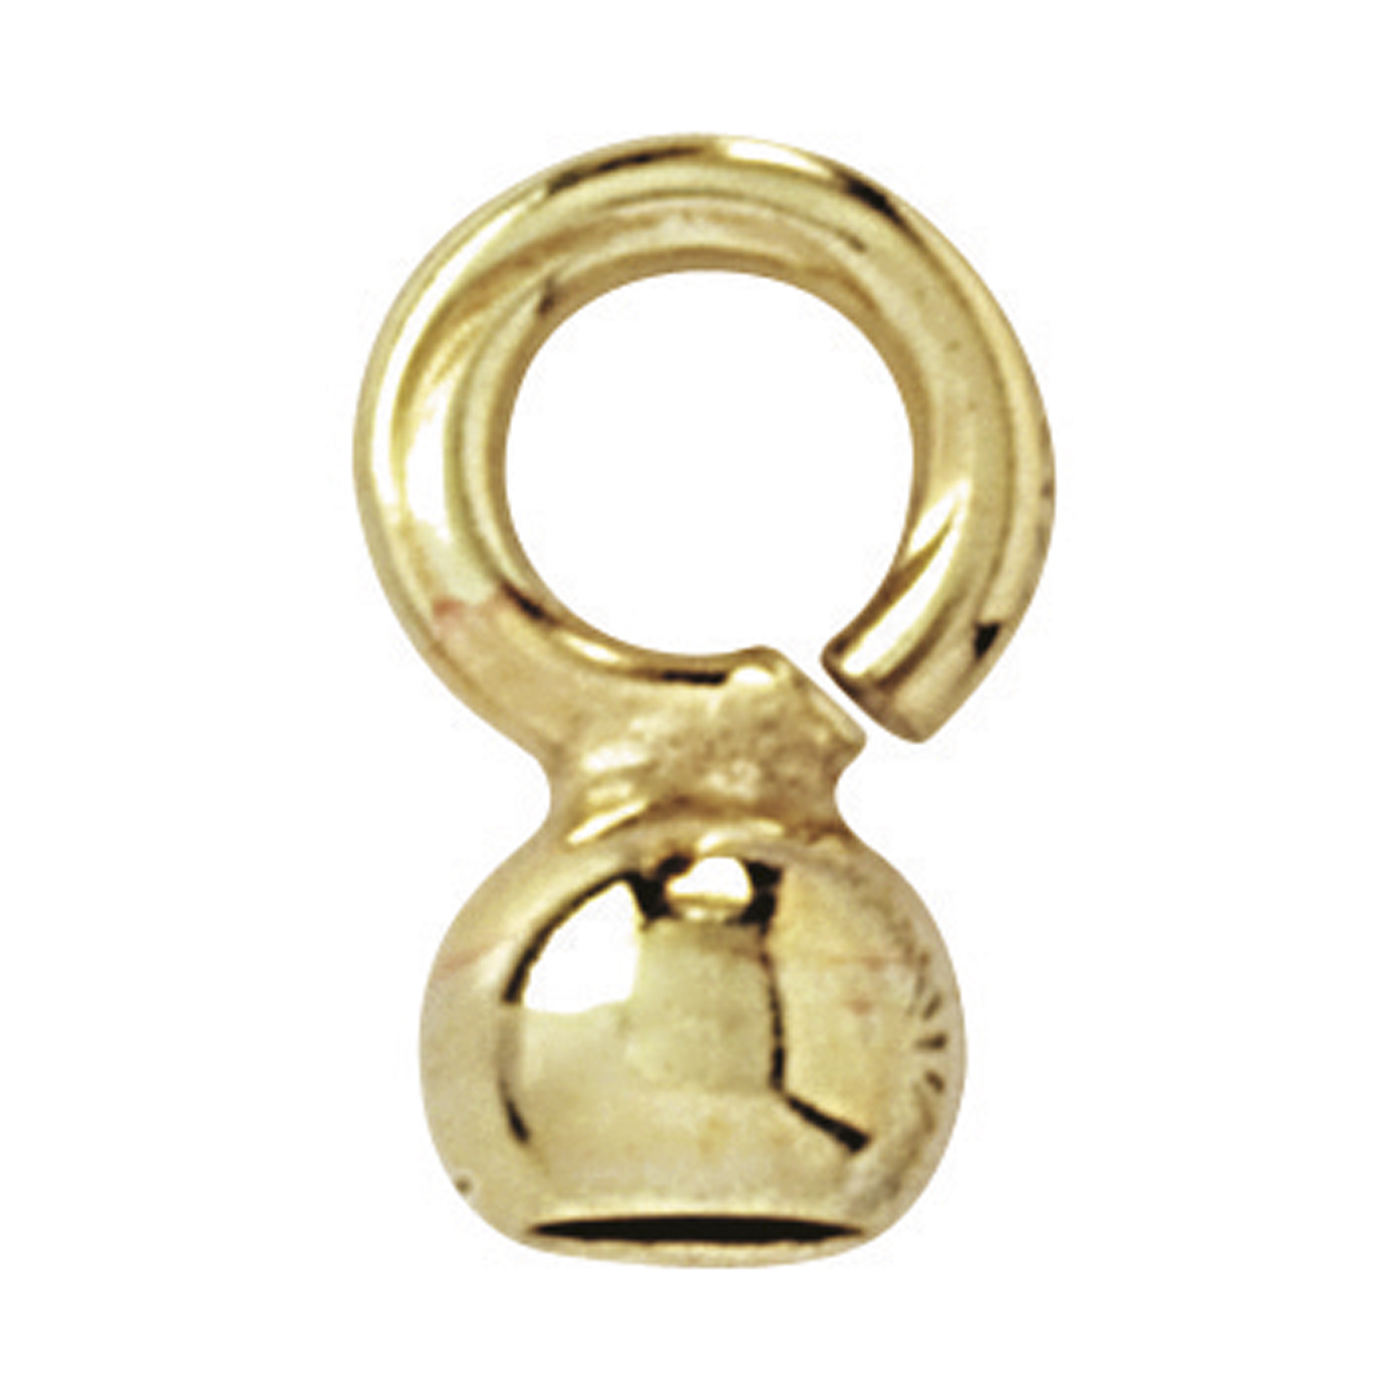 End Cap, Ball, Rolled Gold, ø 2.5 mm, Small Lug - 1 piece